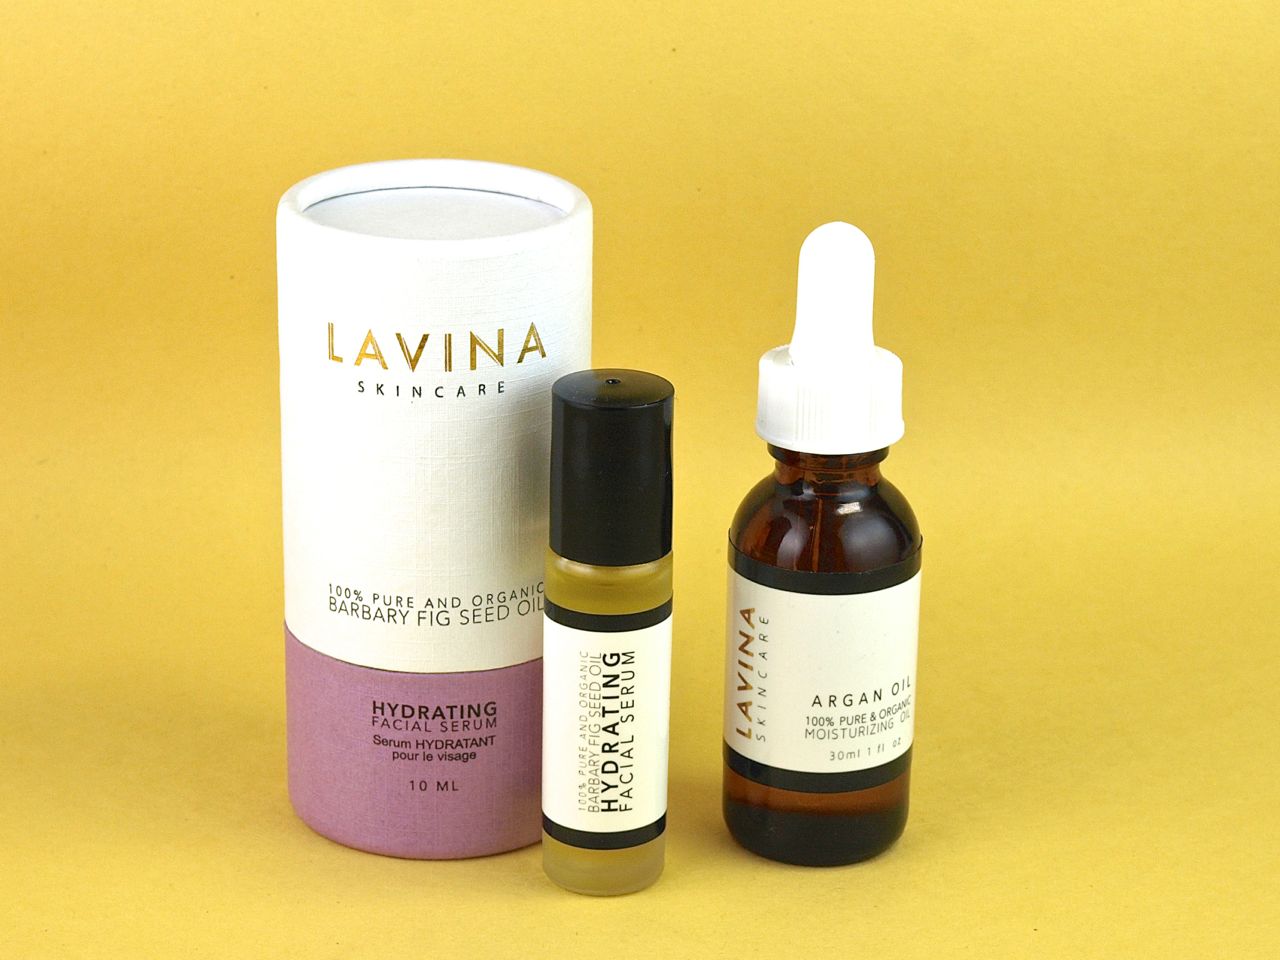 Lavina Skincare Barbary Fig Seed Oil & Argan Oil: Review